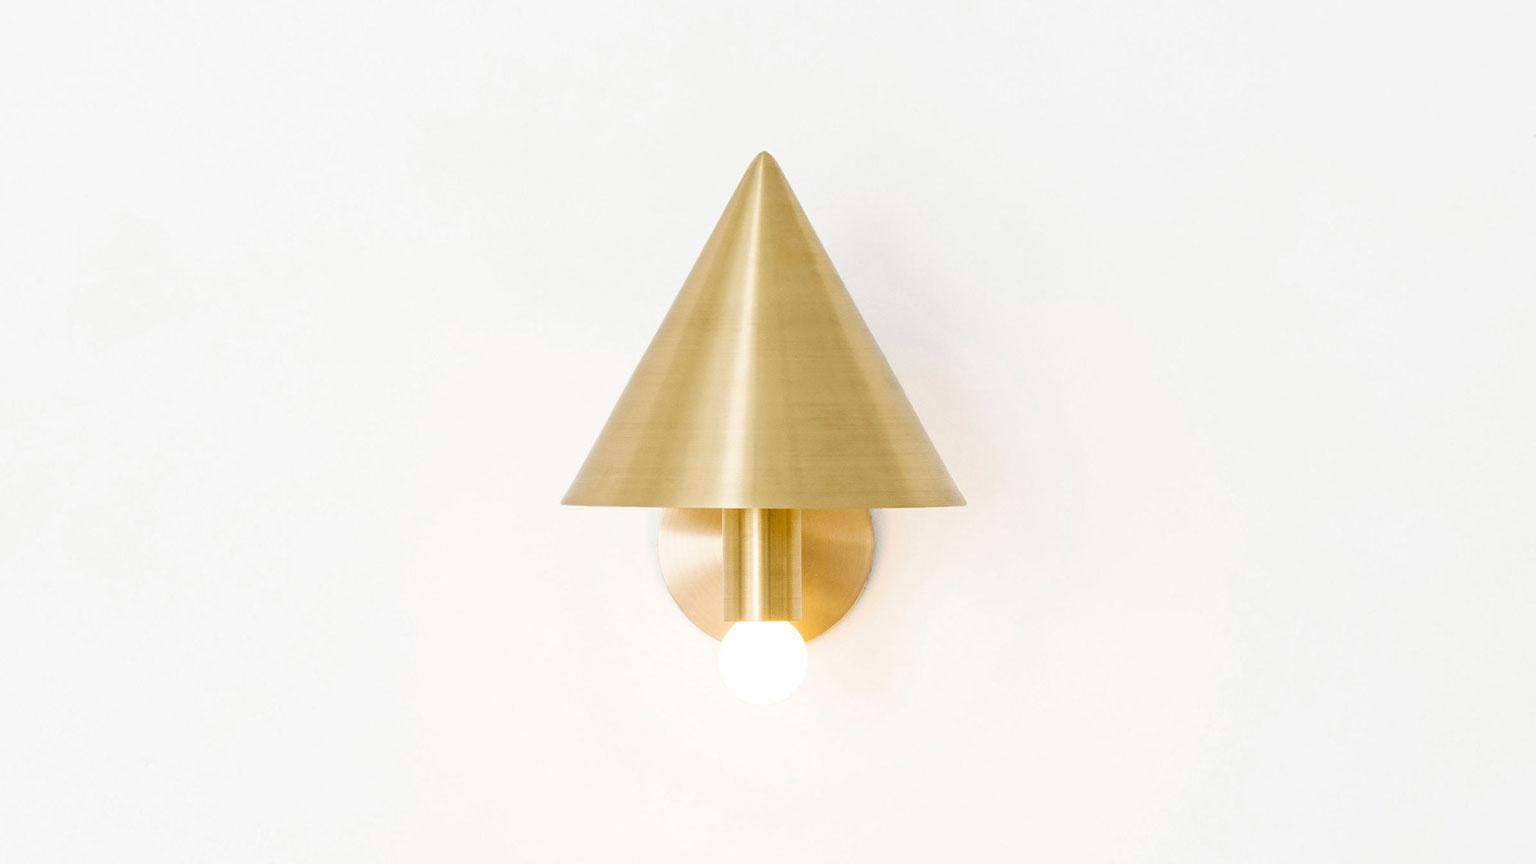 The canopy sconce deconstructs the conventional wall sconce into a series of expressed, geometric relationships. A bold conical shroud rises above a softly glowing bulb creating a canopy of diffused reflection. UL listed. Damp rated upon request.